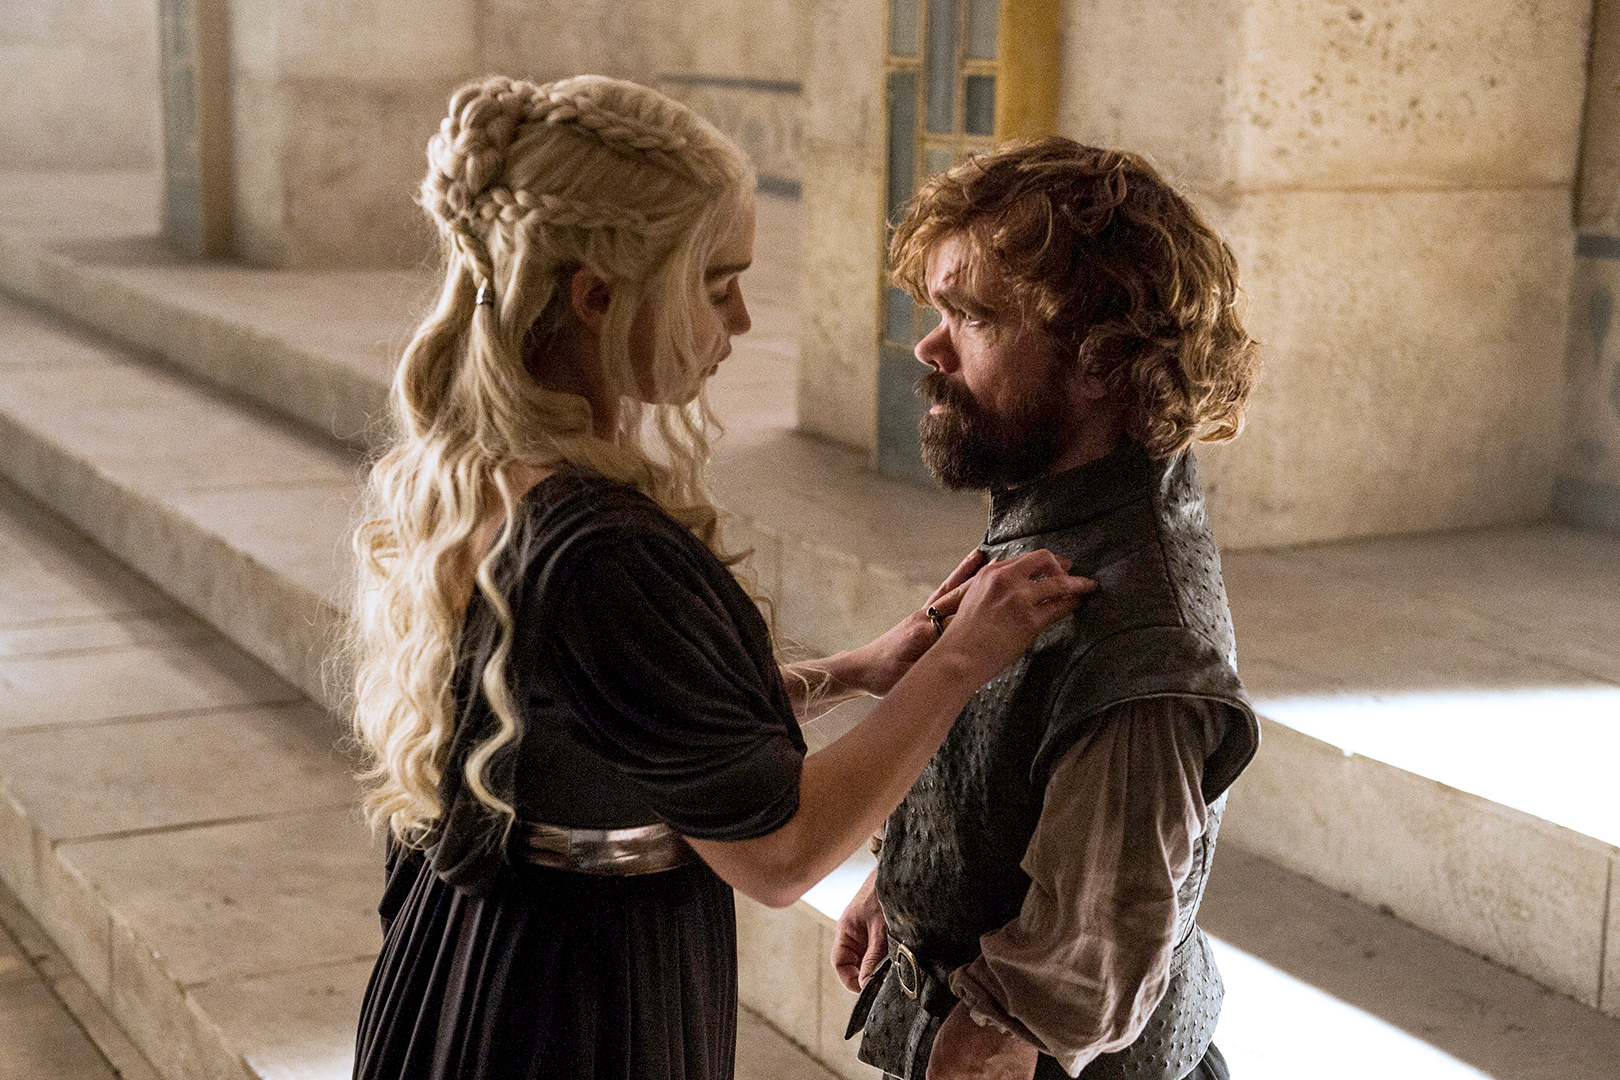 Emilia Clarke and Peter Dinklage in season 6 of 'Game of Thrones.' (HBO)